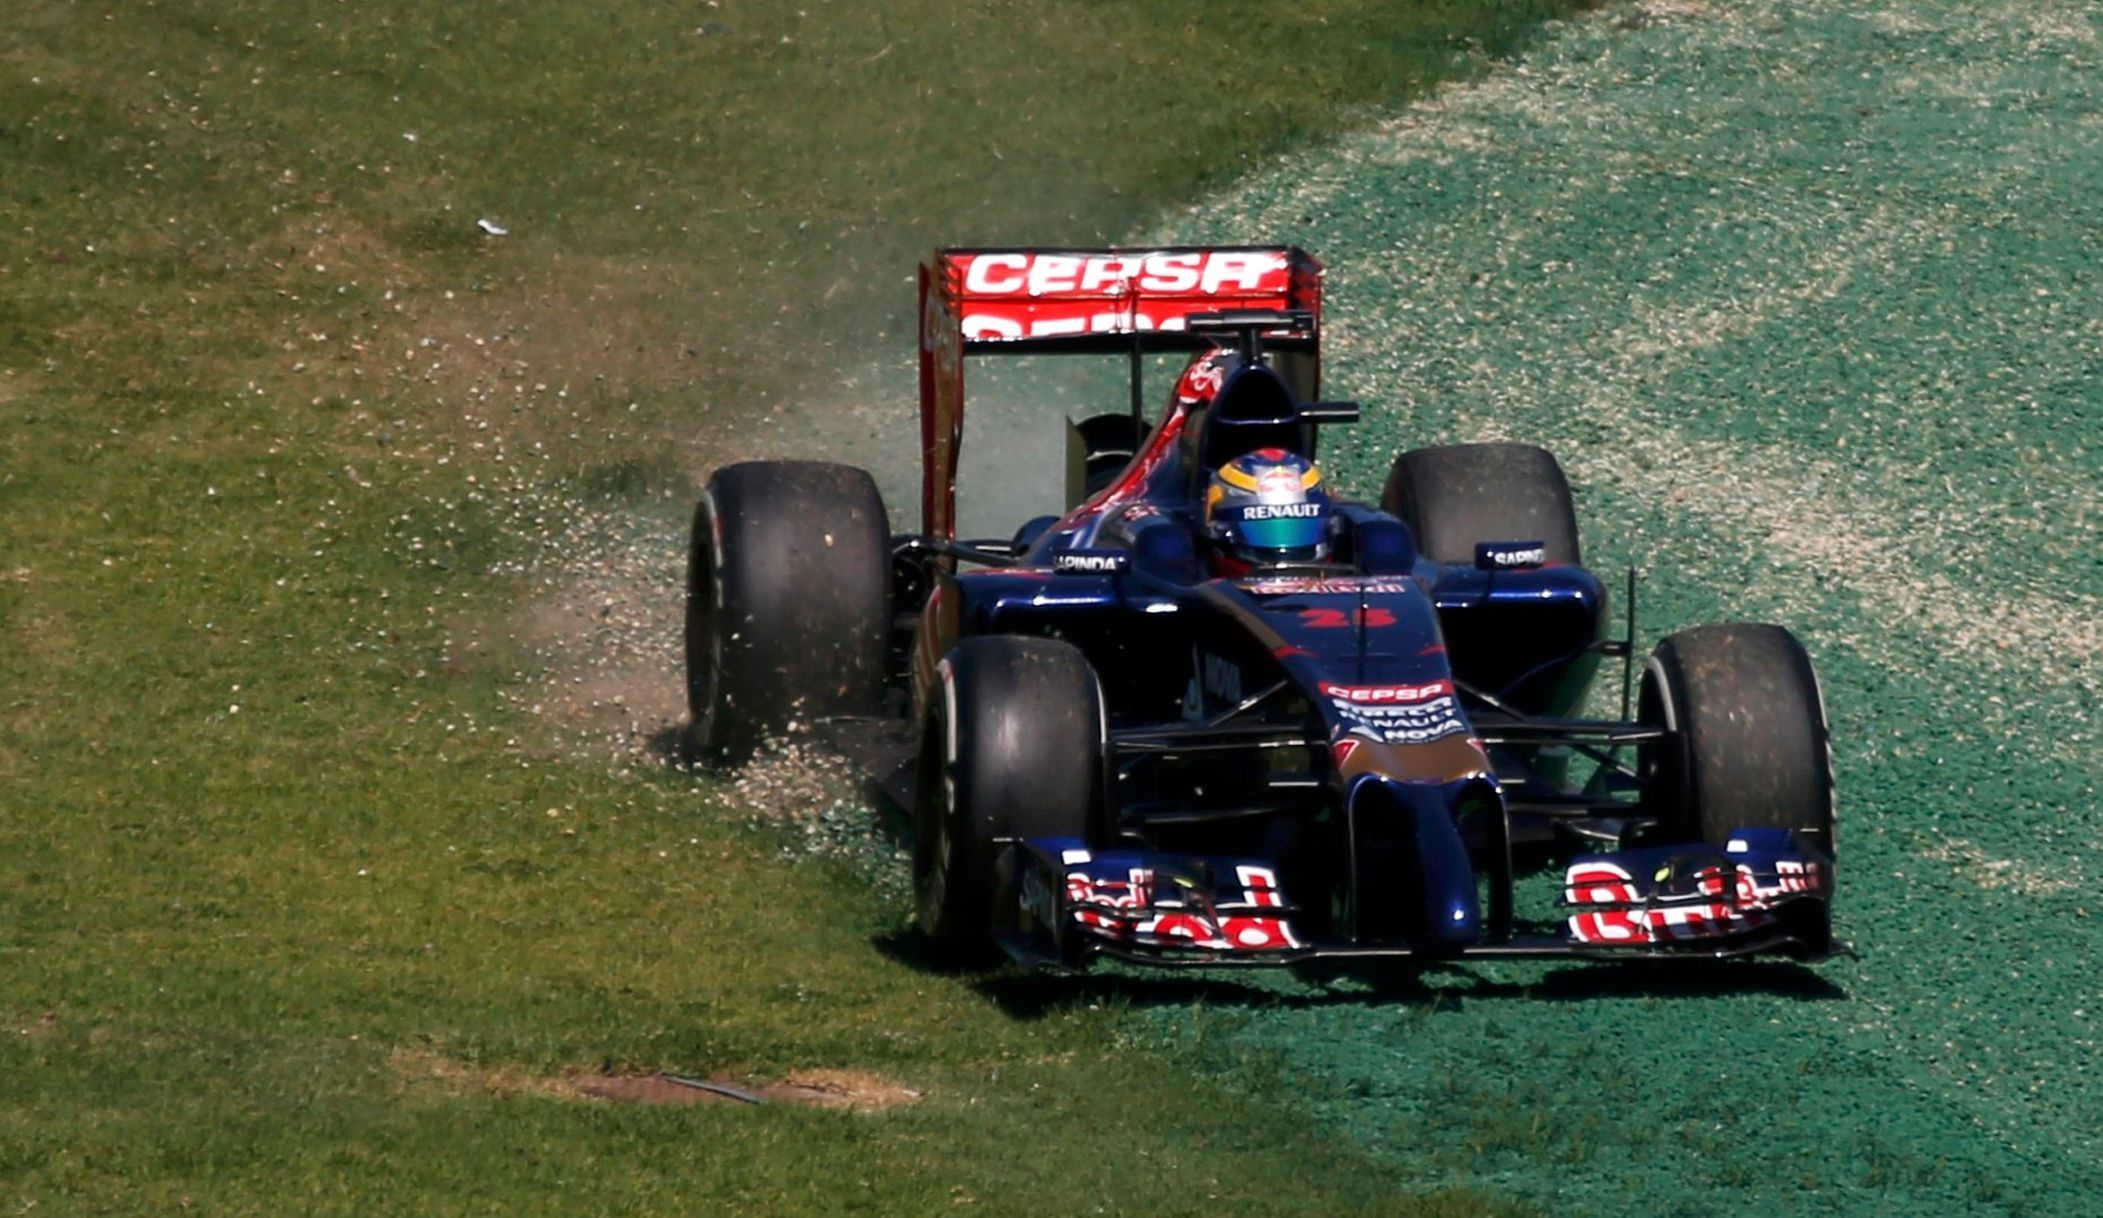 Toro Rosso Formula One driver Vergne of France drives on the grass during the first practice session of the Australian F1 Grand Prix in Melbourne